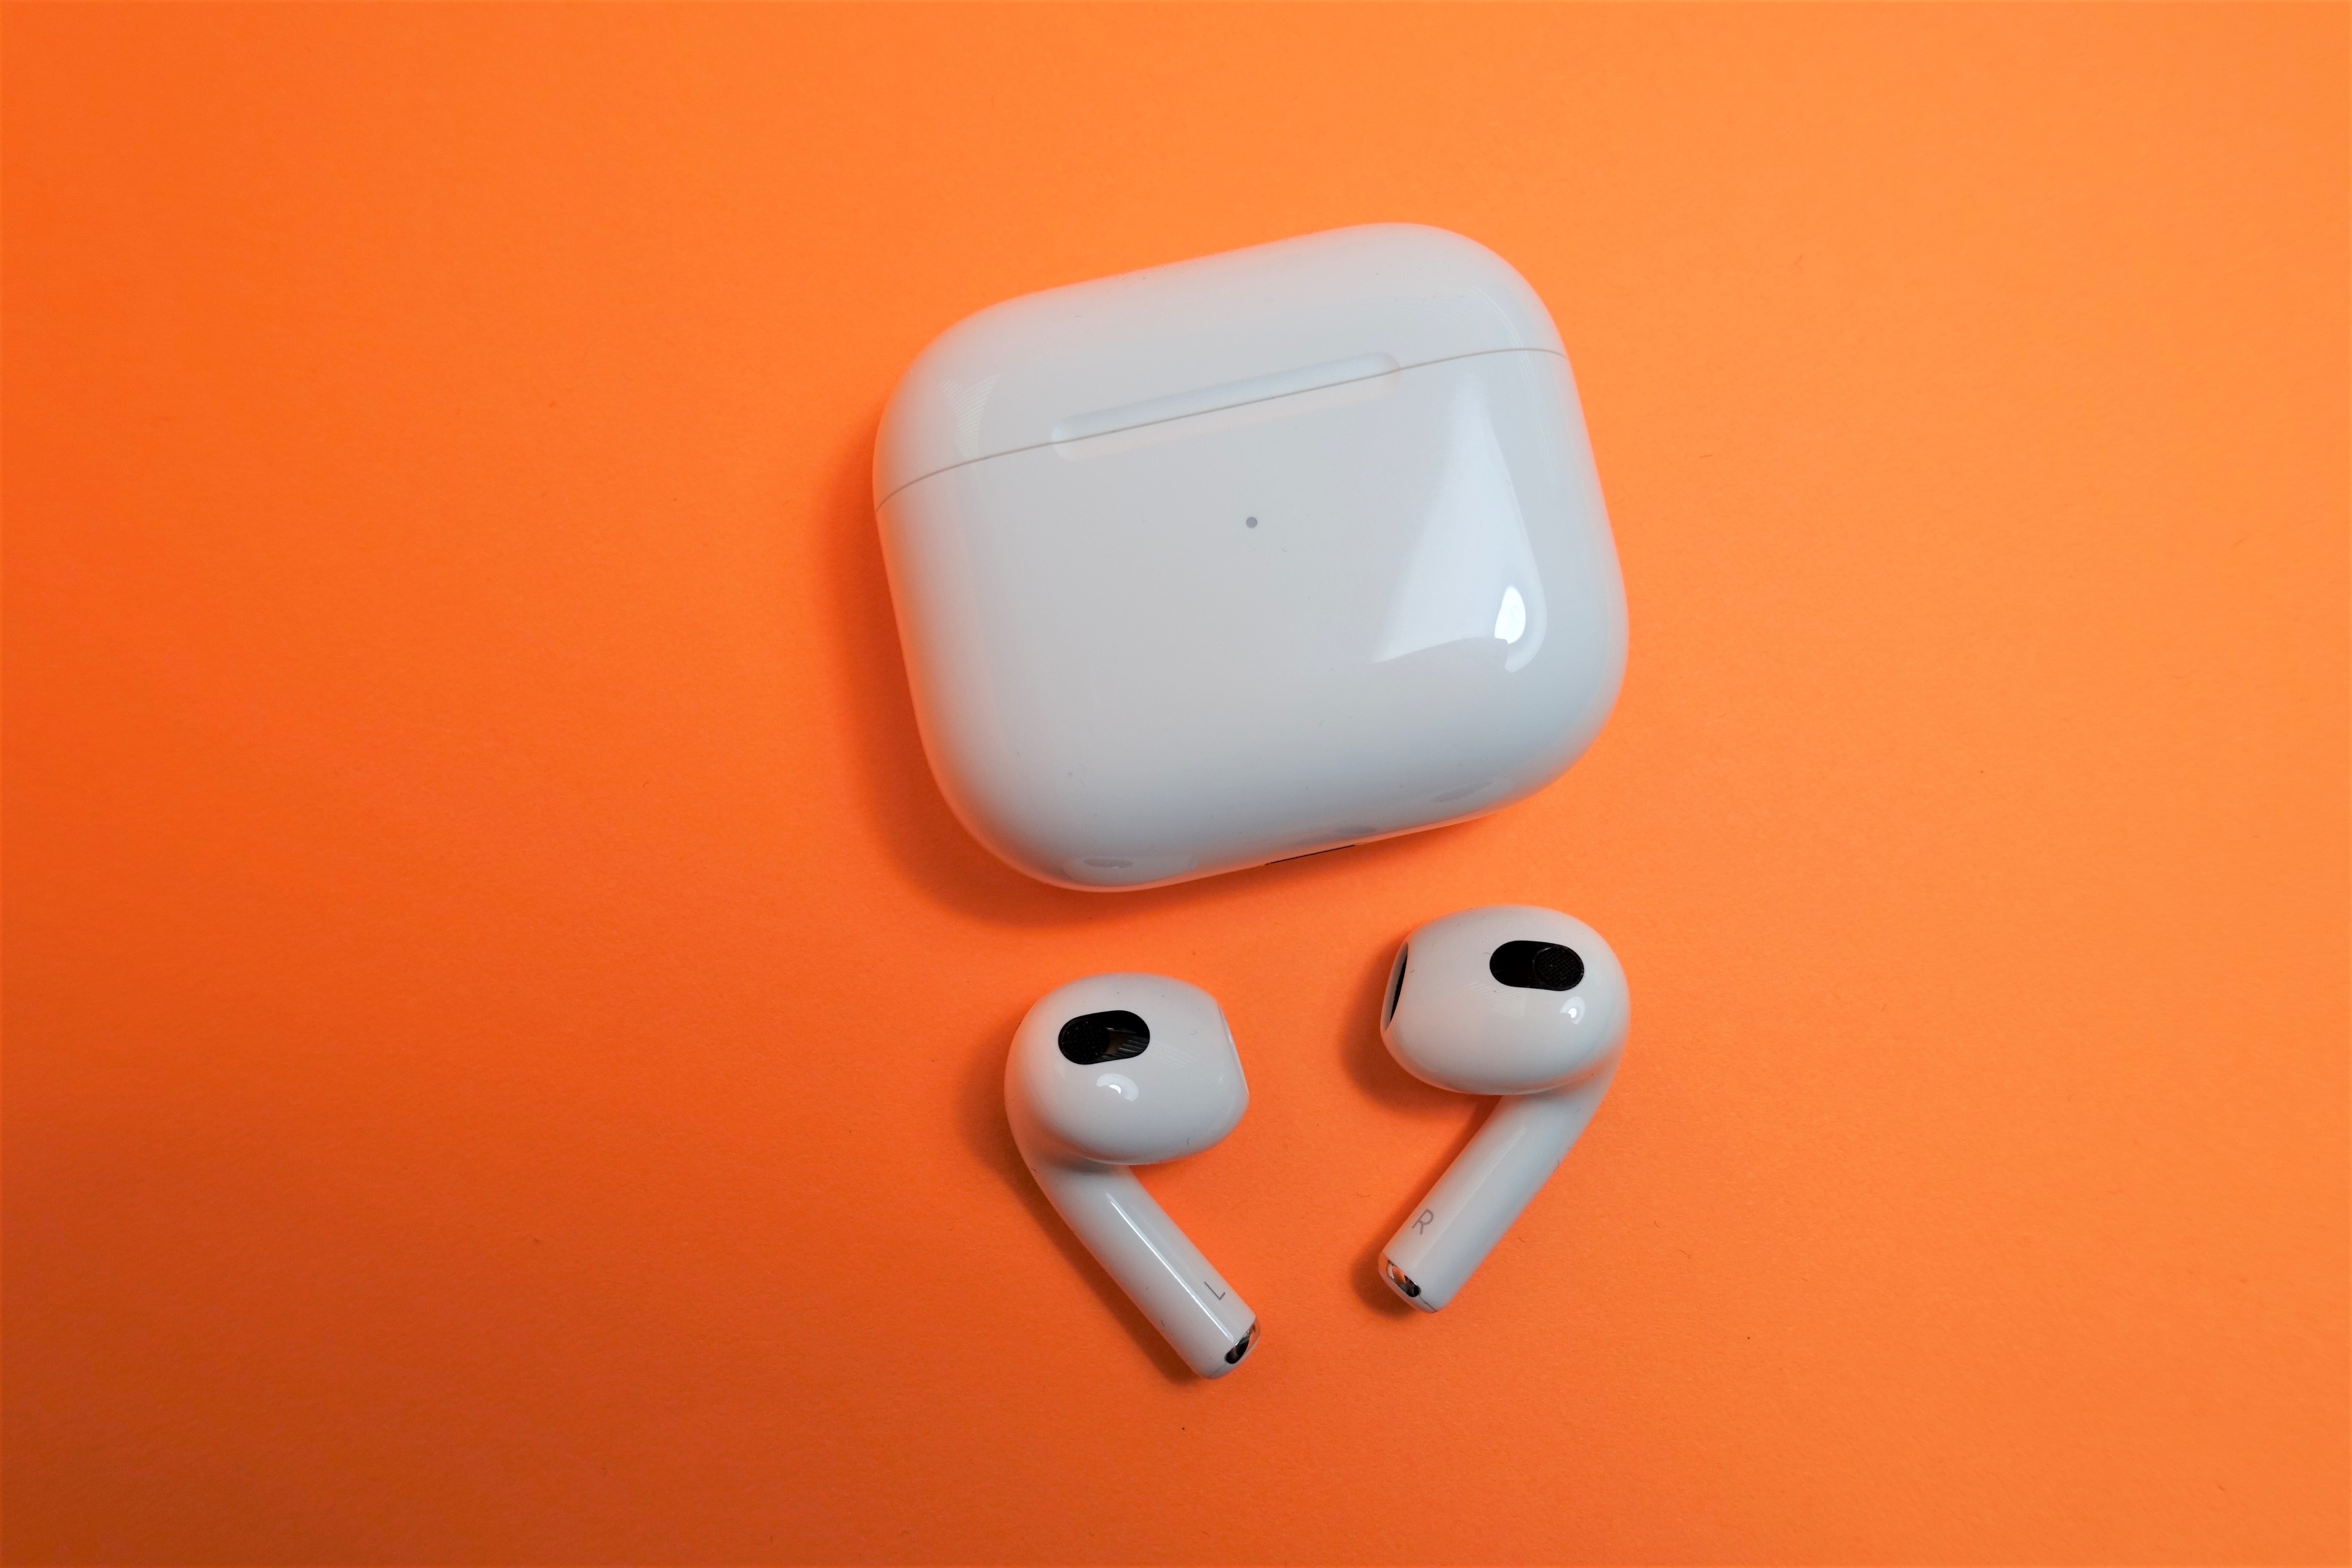 The weekend’s best deals Apple’s newest AirPods, Google’s Pixel 5a